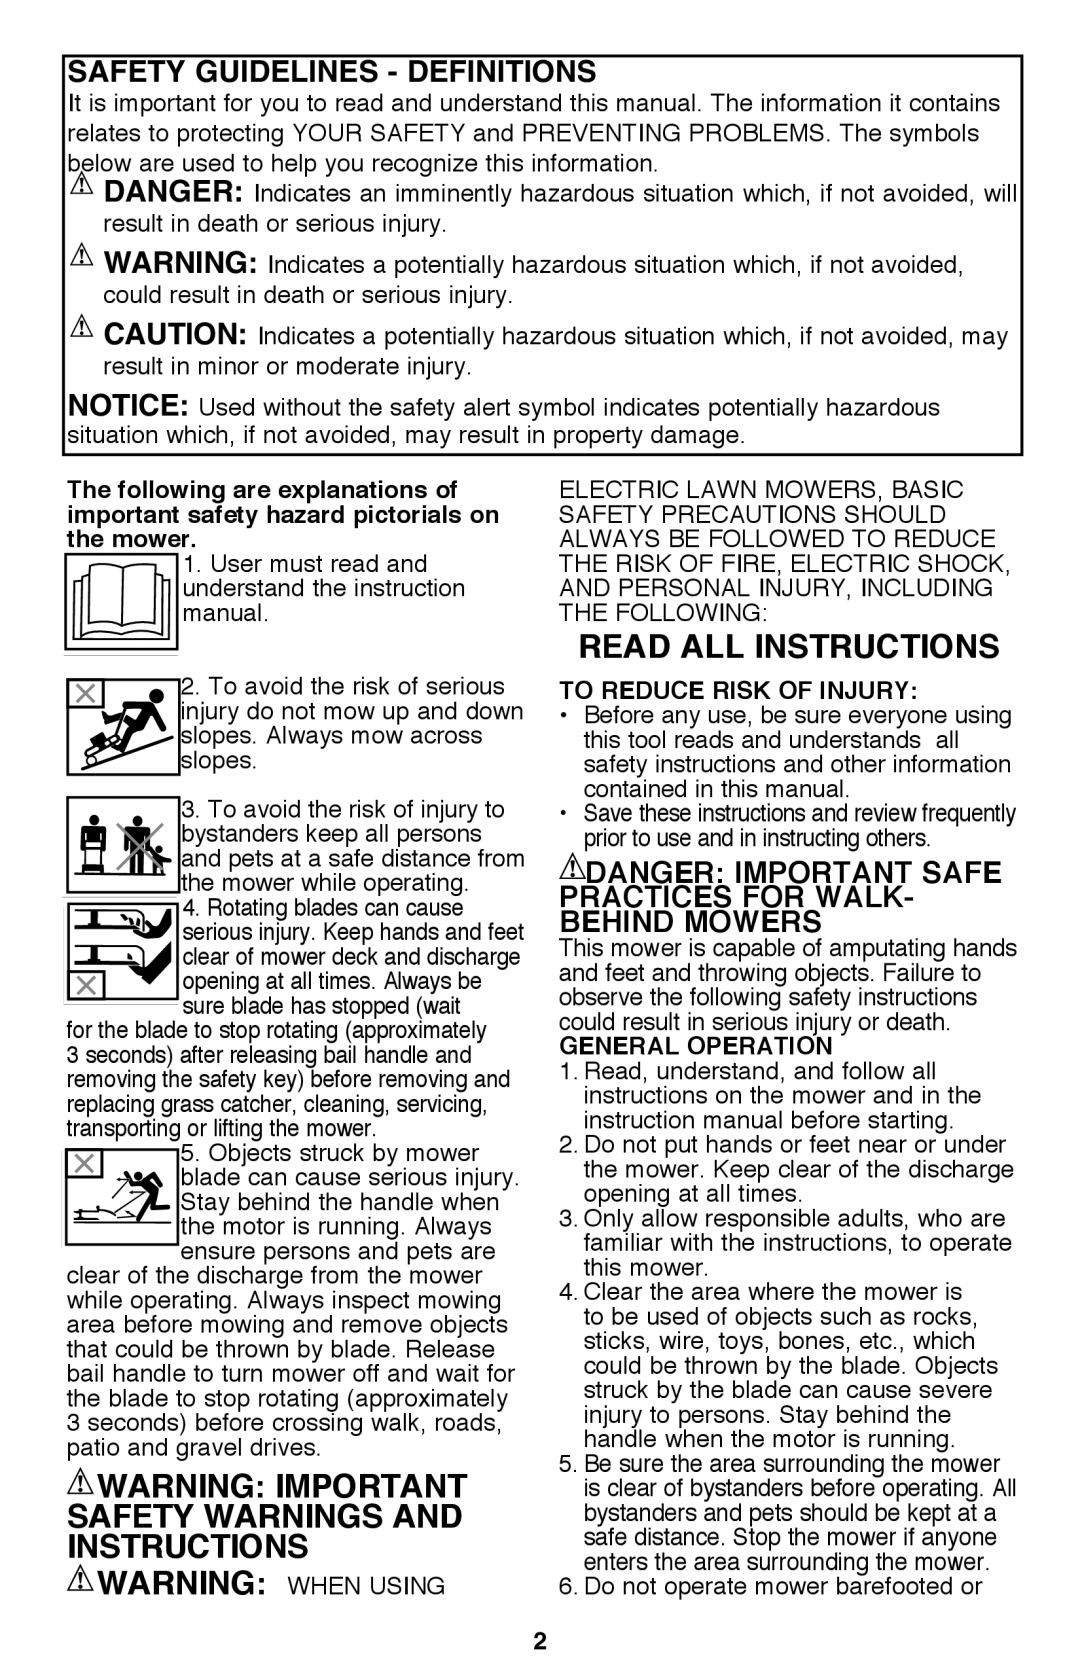 Black & Decker CM2040 instruction manual WARNING Important Safety Warnings and Instructions, Read All Instructions 